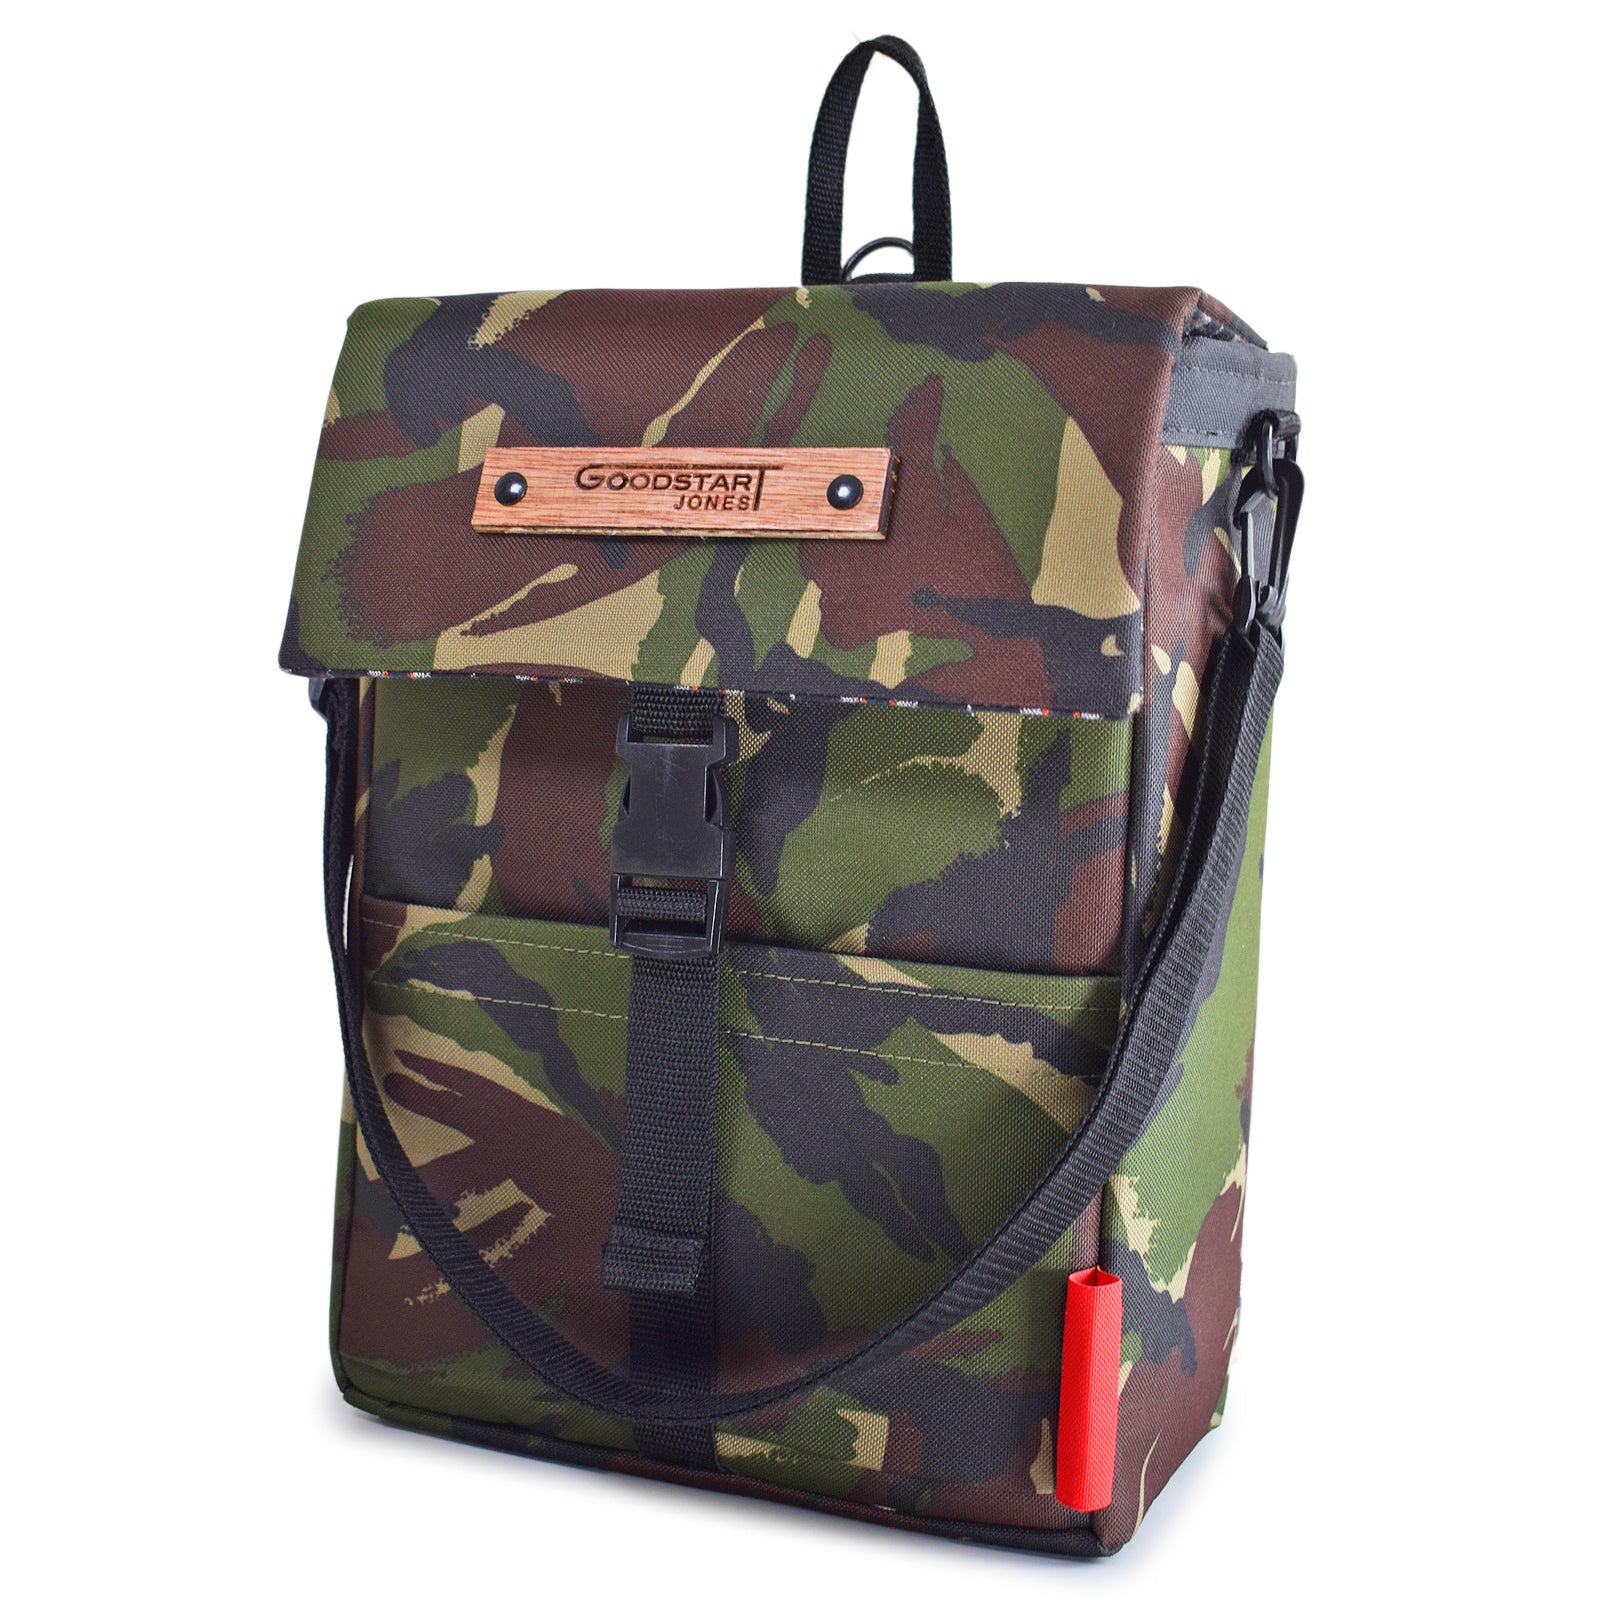 Camouflage green small Backpack upright front with wooden branded logo